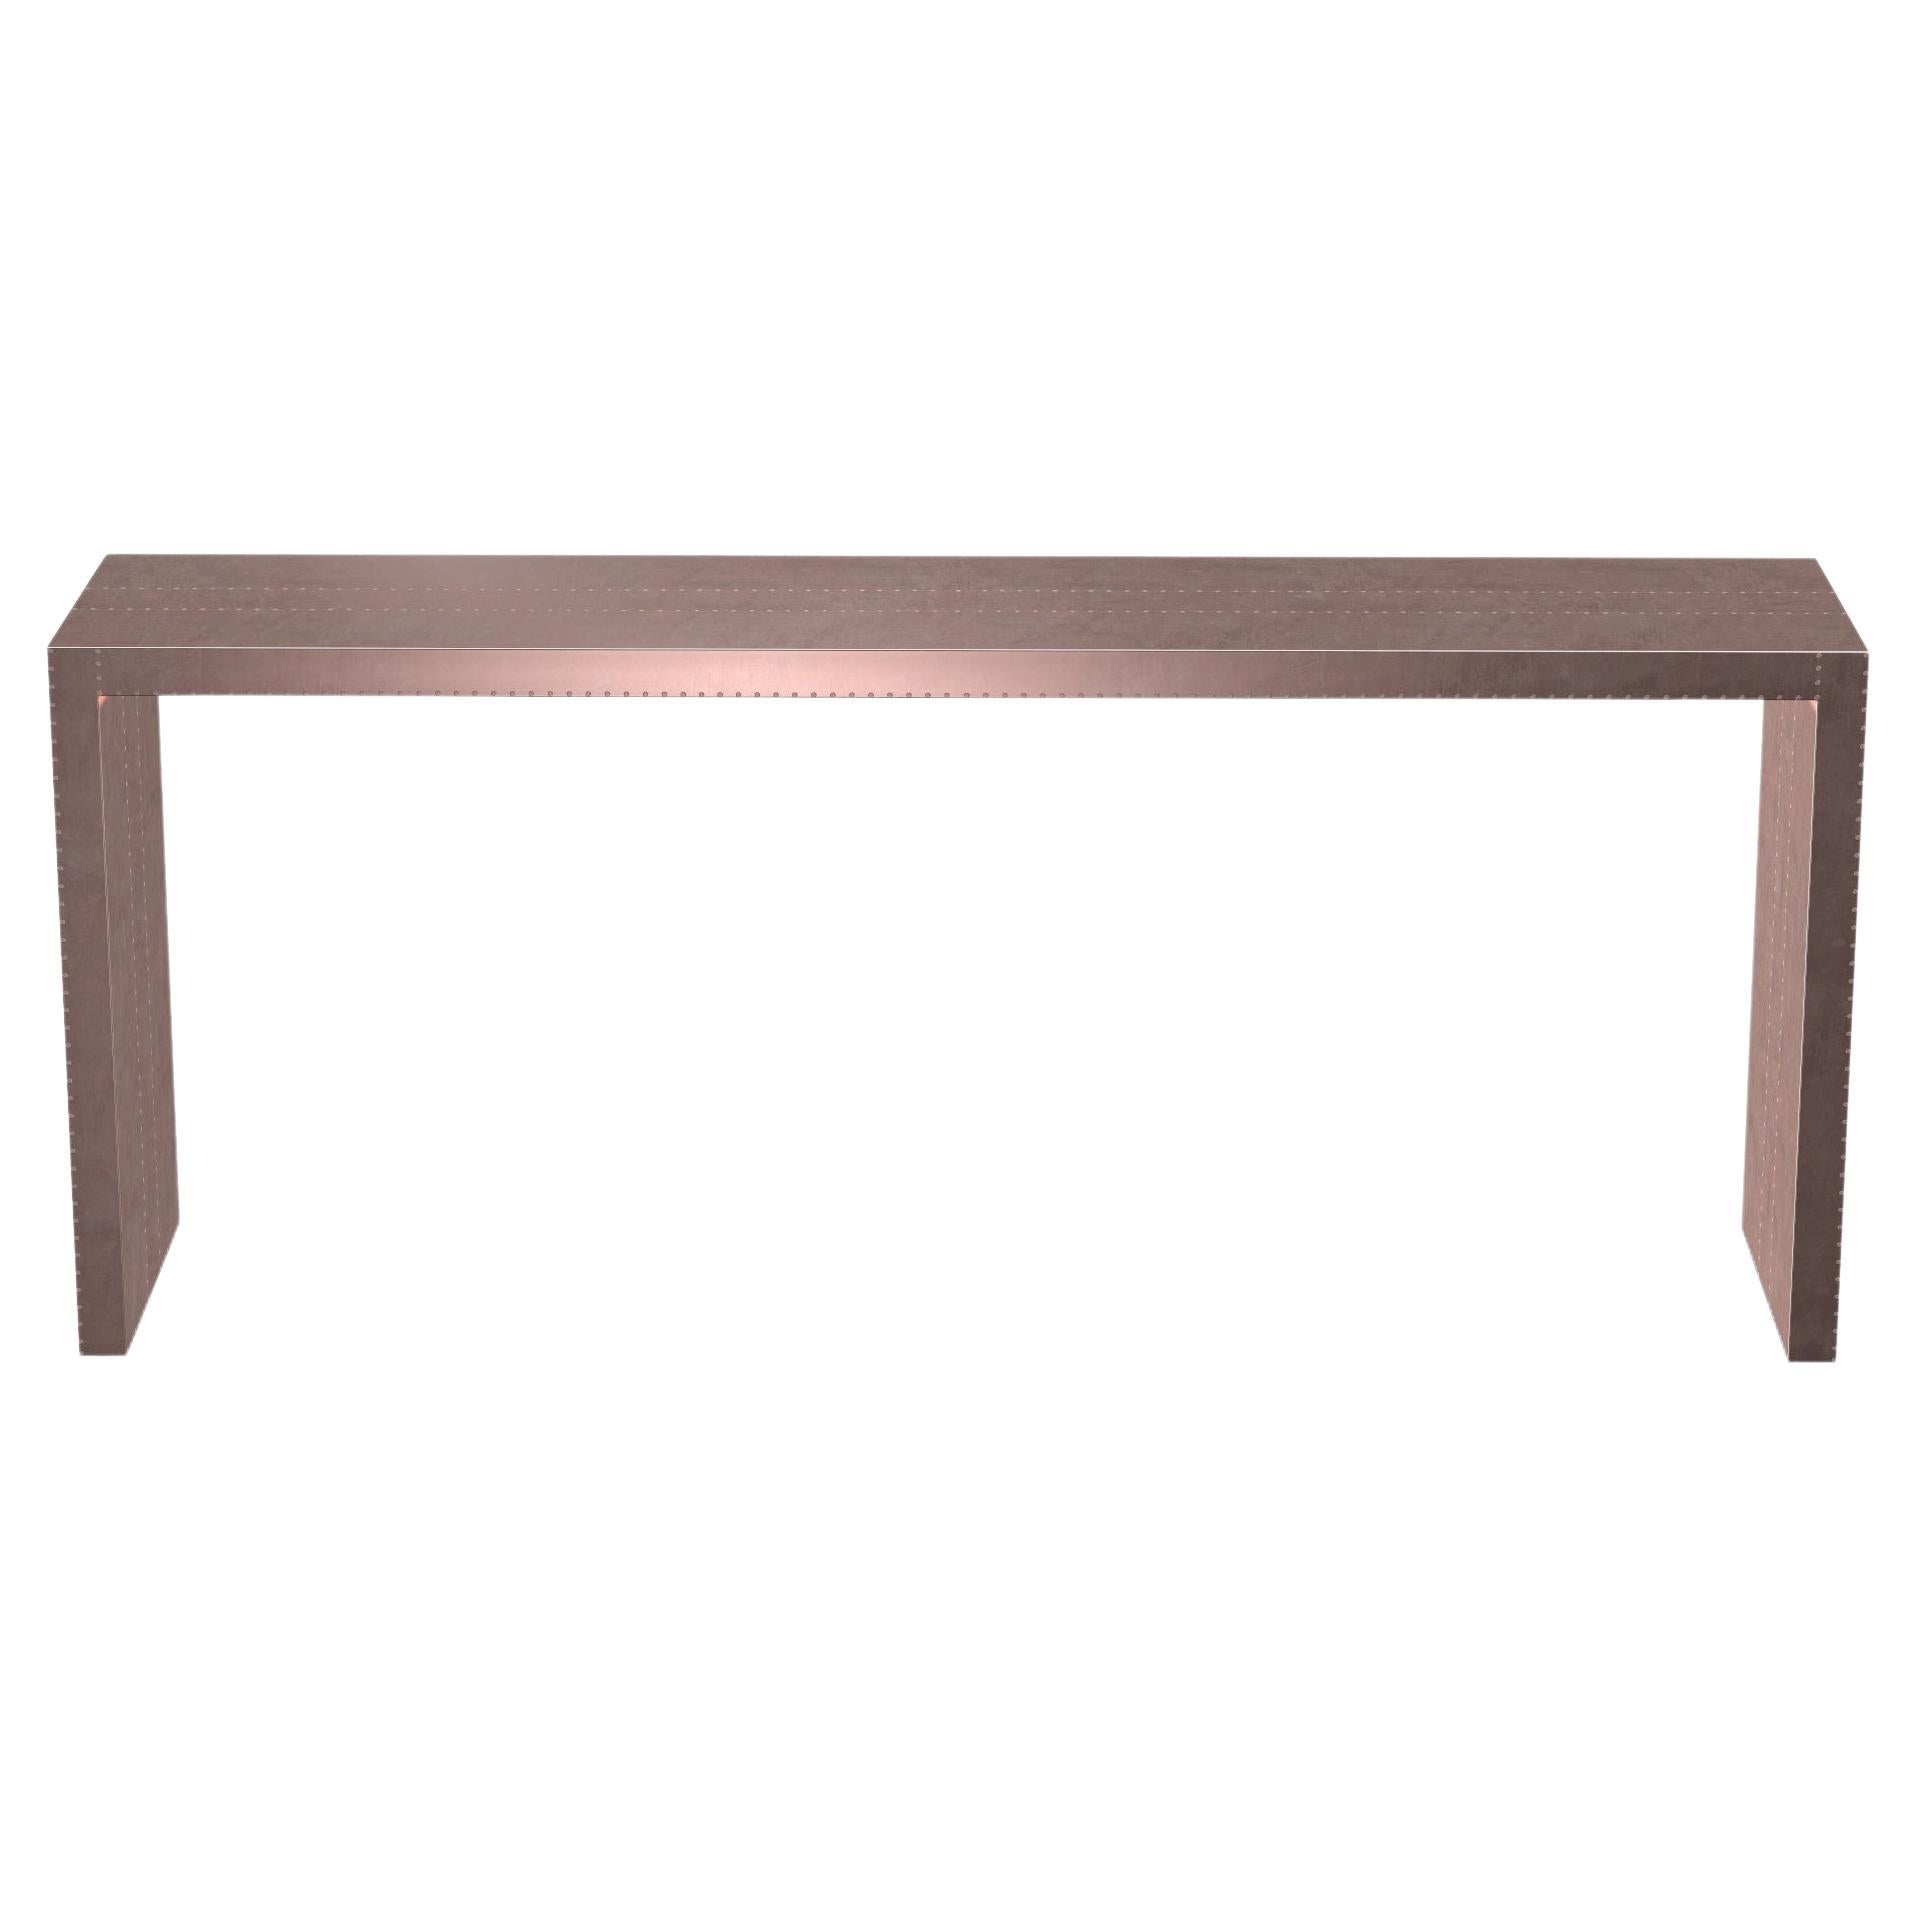 Art Deco Coffee and Cocktail Tables Rectangular Console in Smooth Copper  For Sale